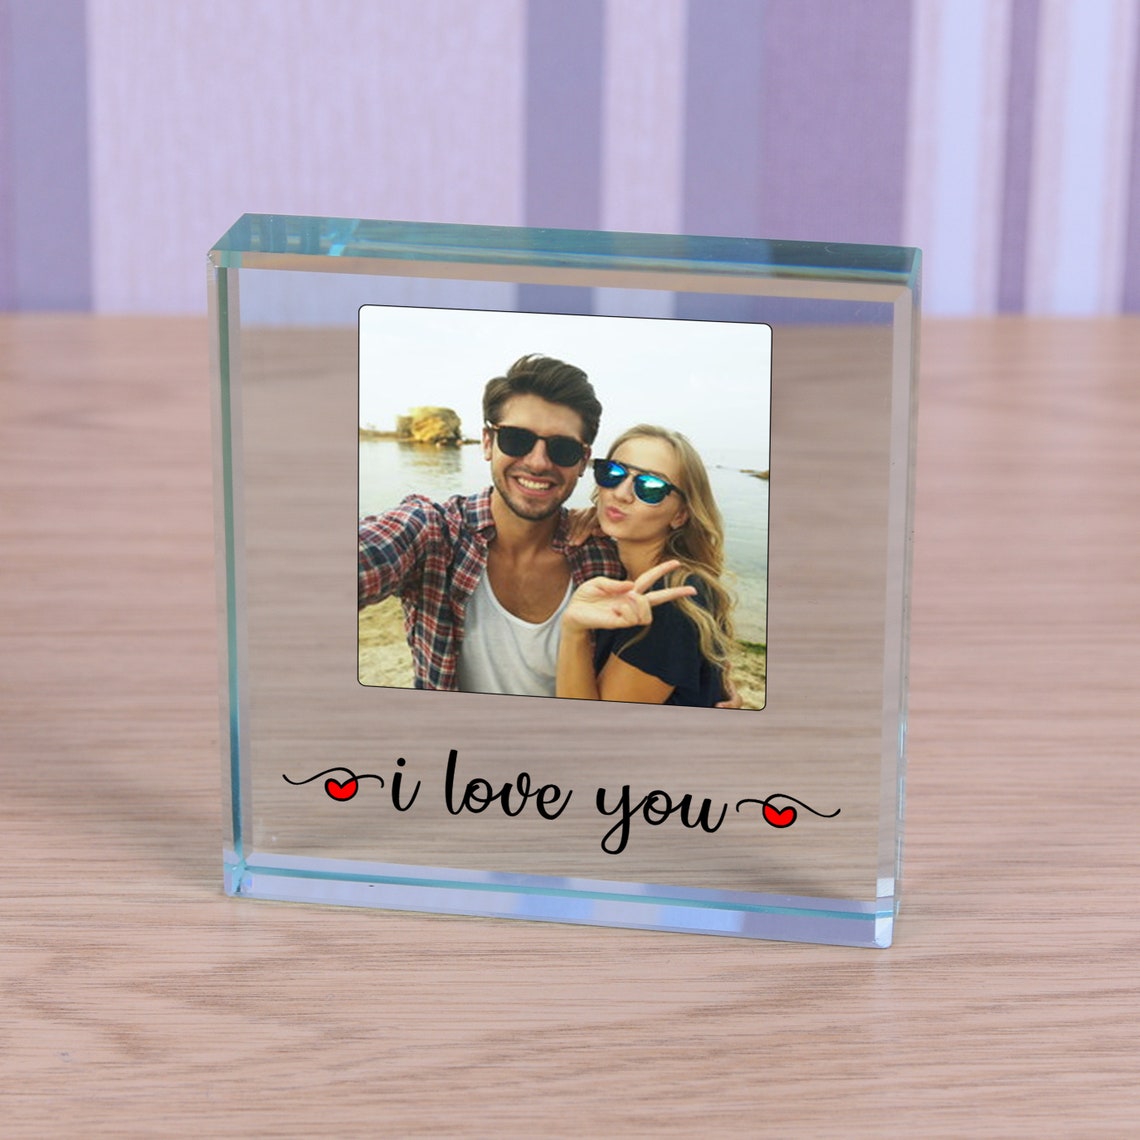 Token photo frame: 3-year anniversary gift for couple